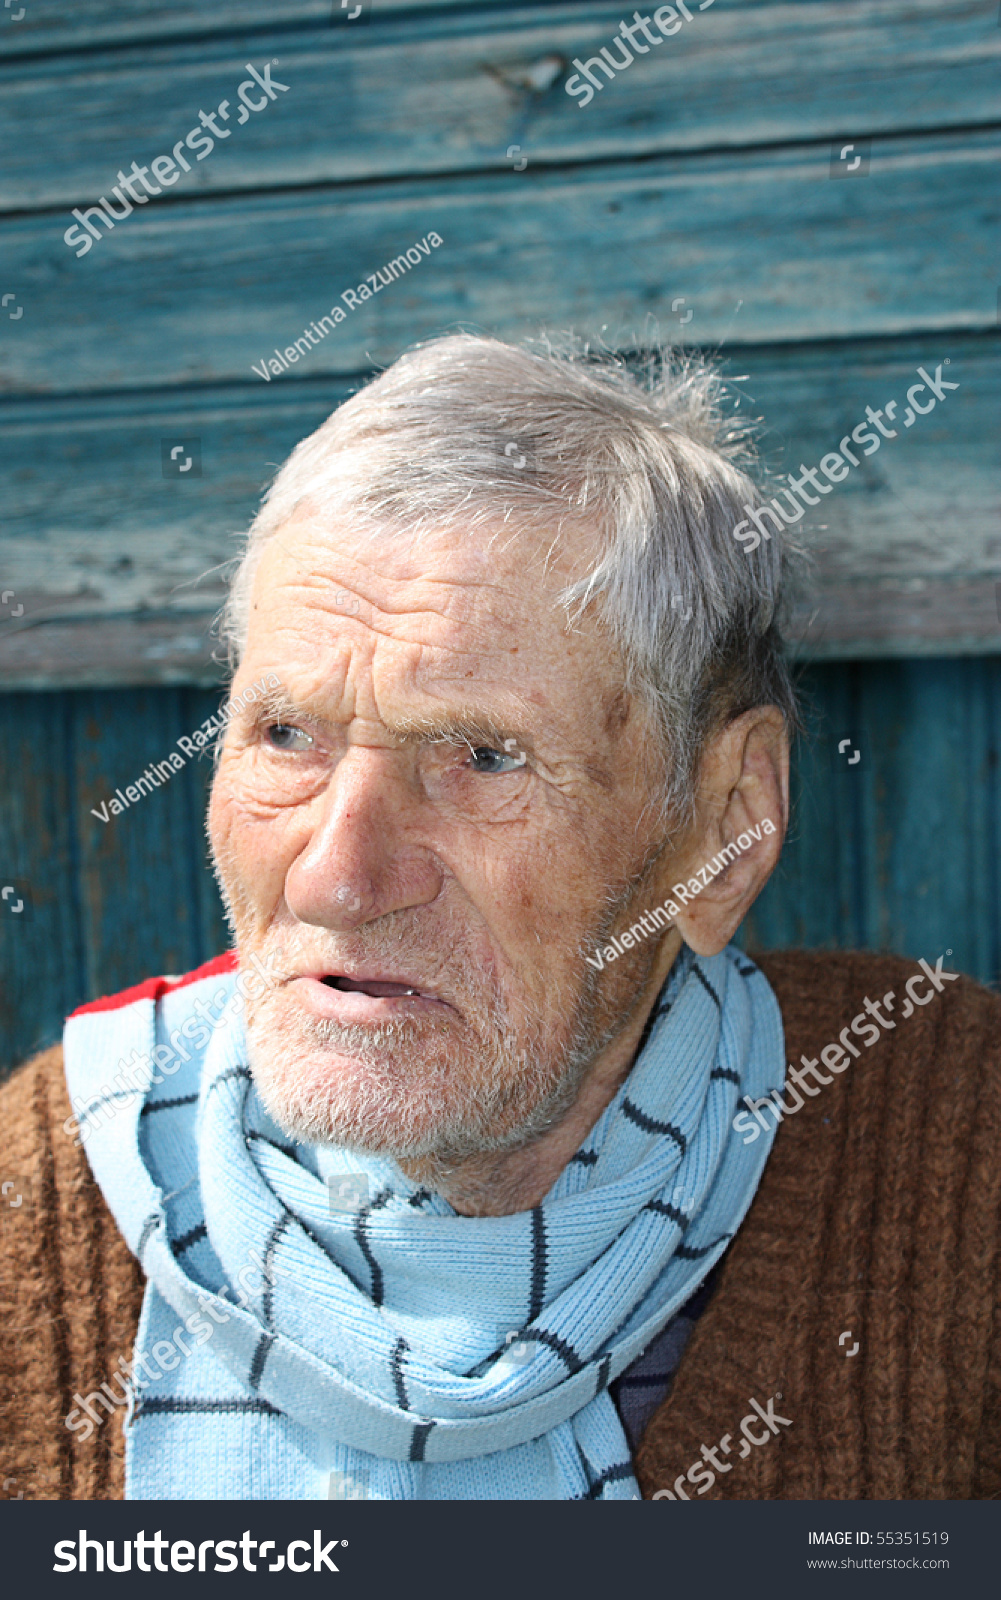 Very old man